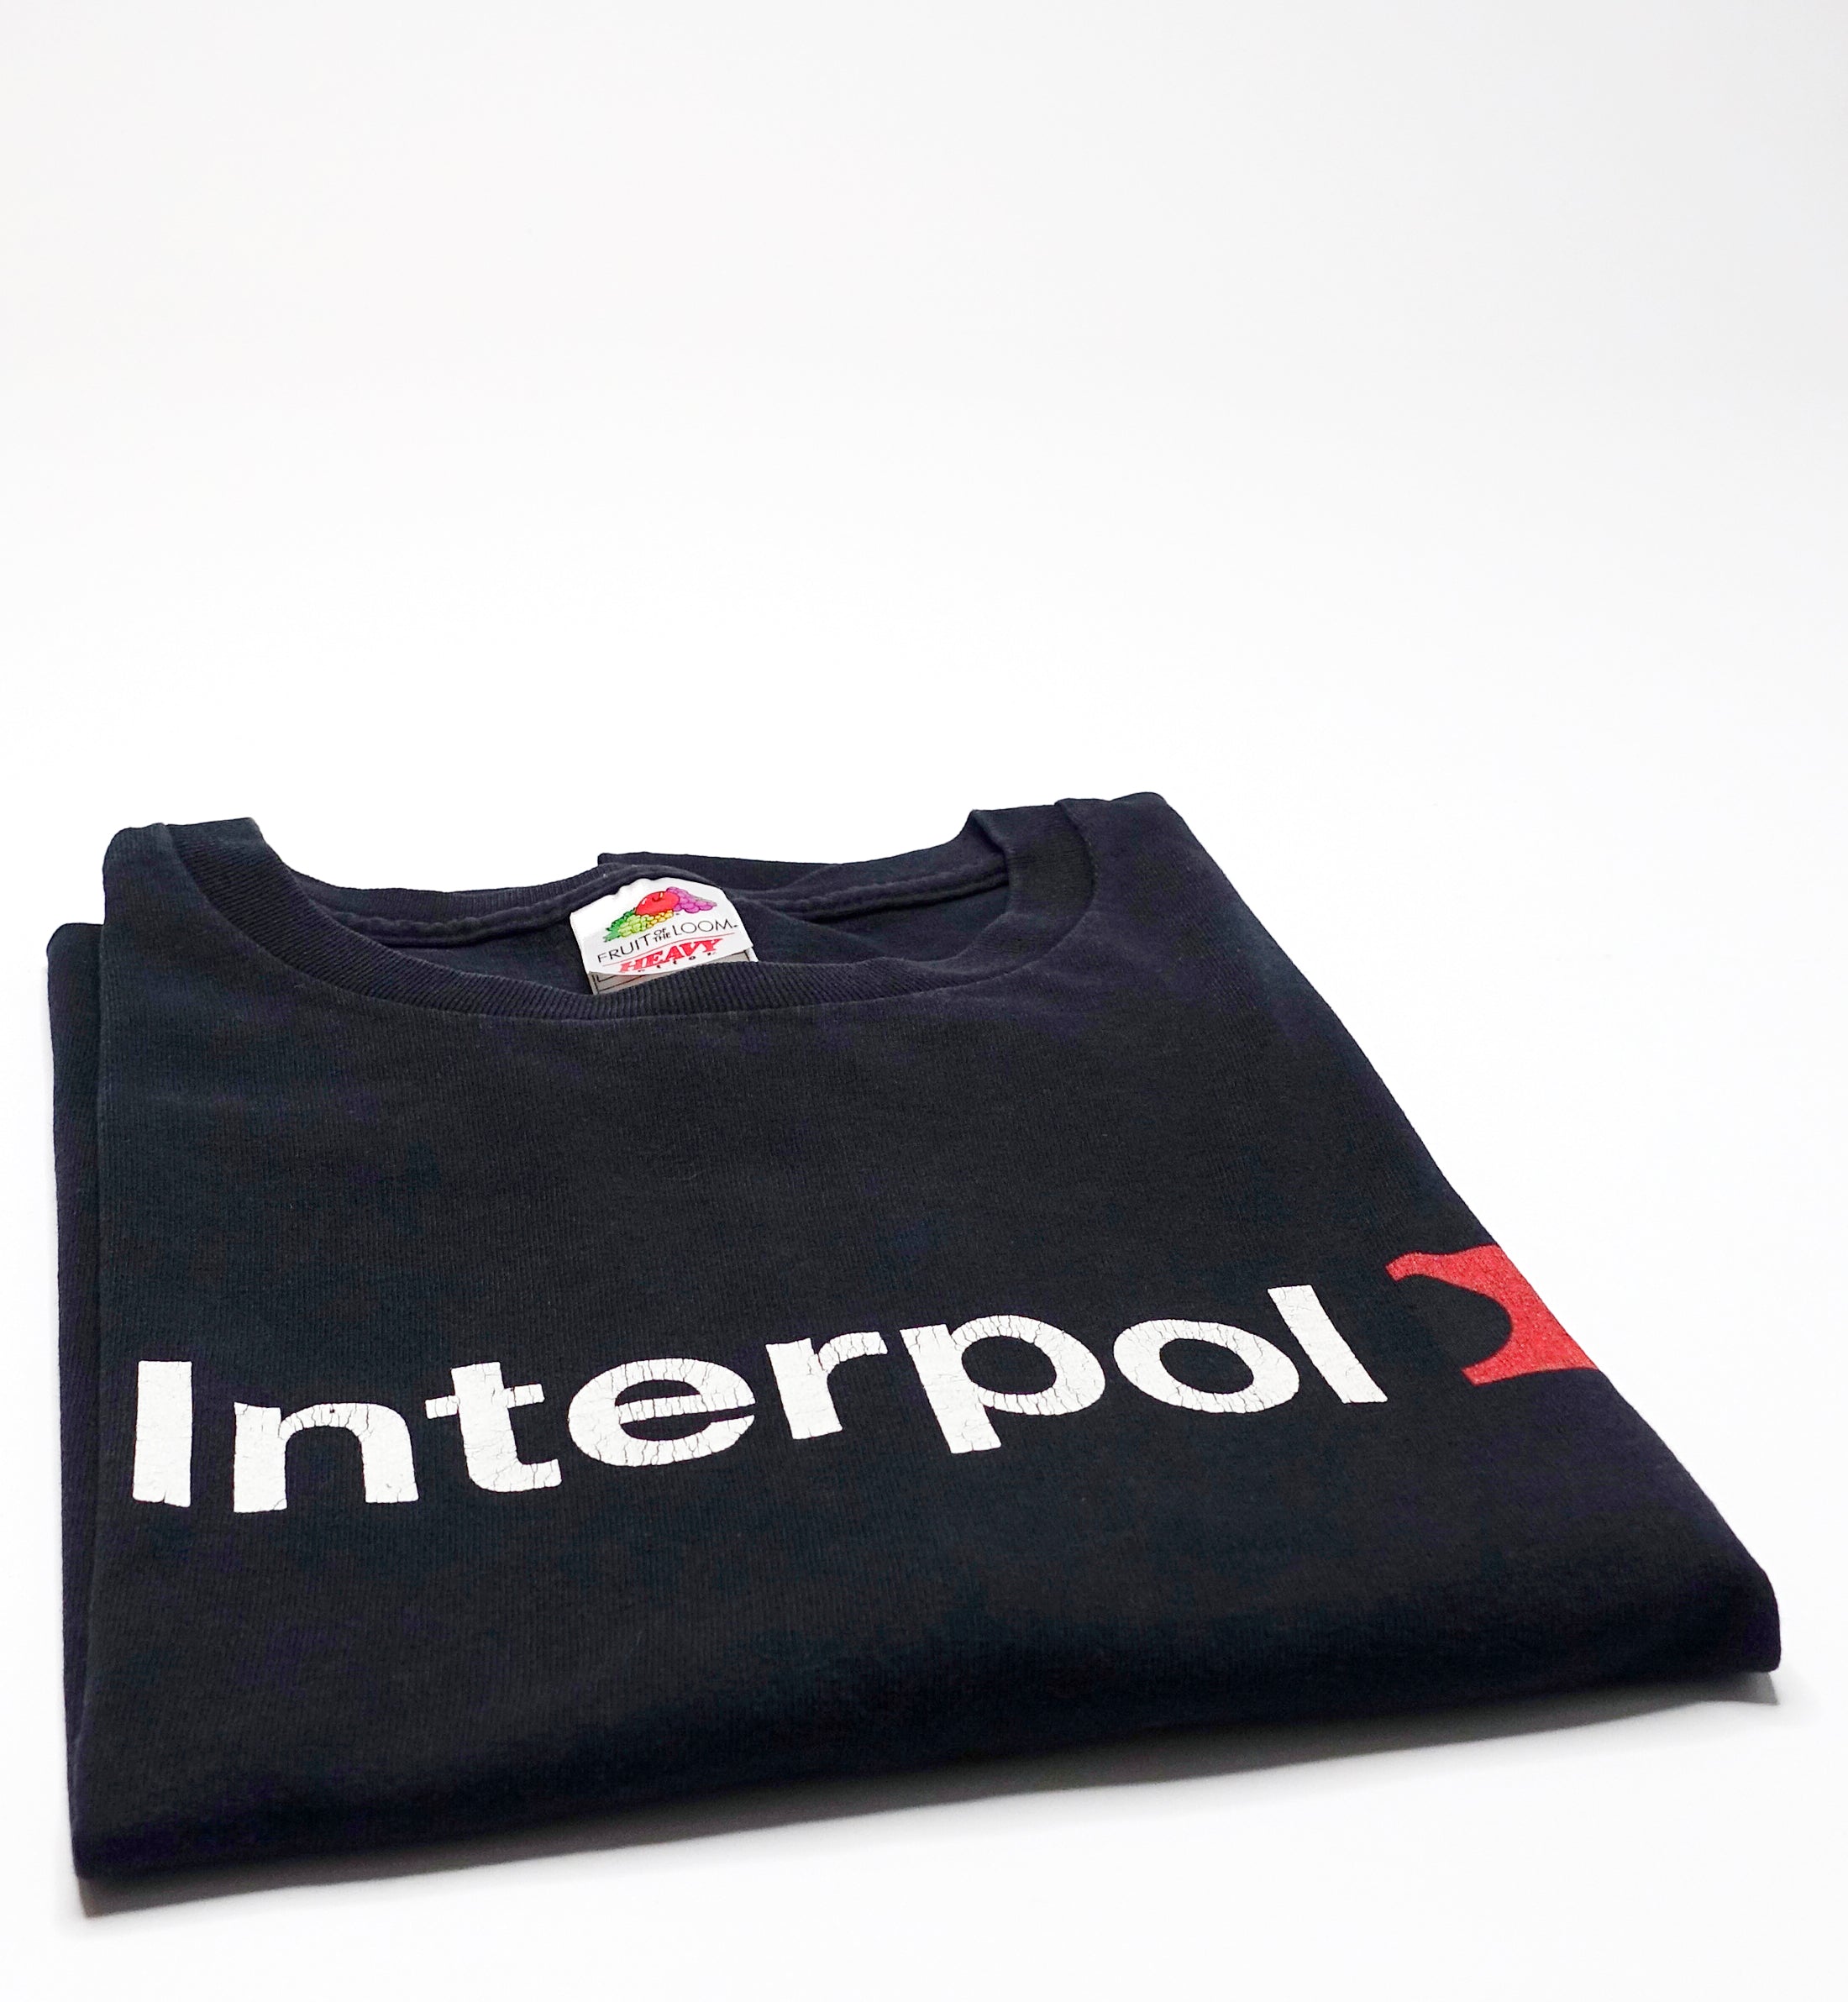 Interpol ‎– Turn On The Bright Lights 2002 Tour Shirt Size Large